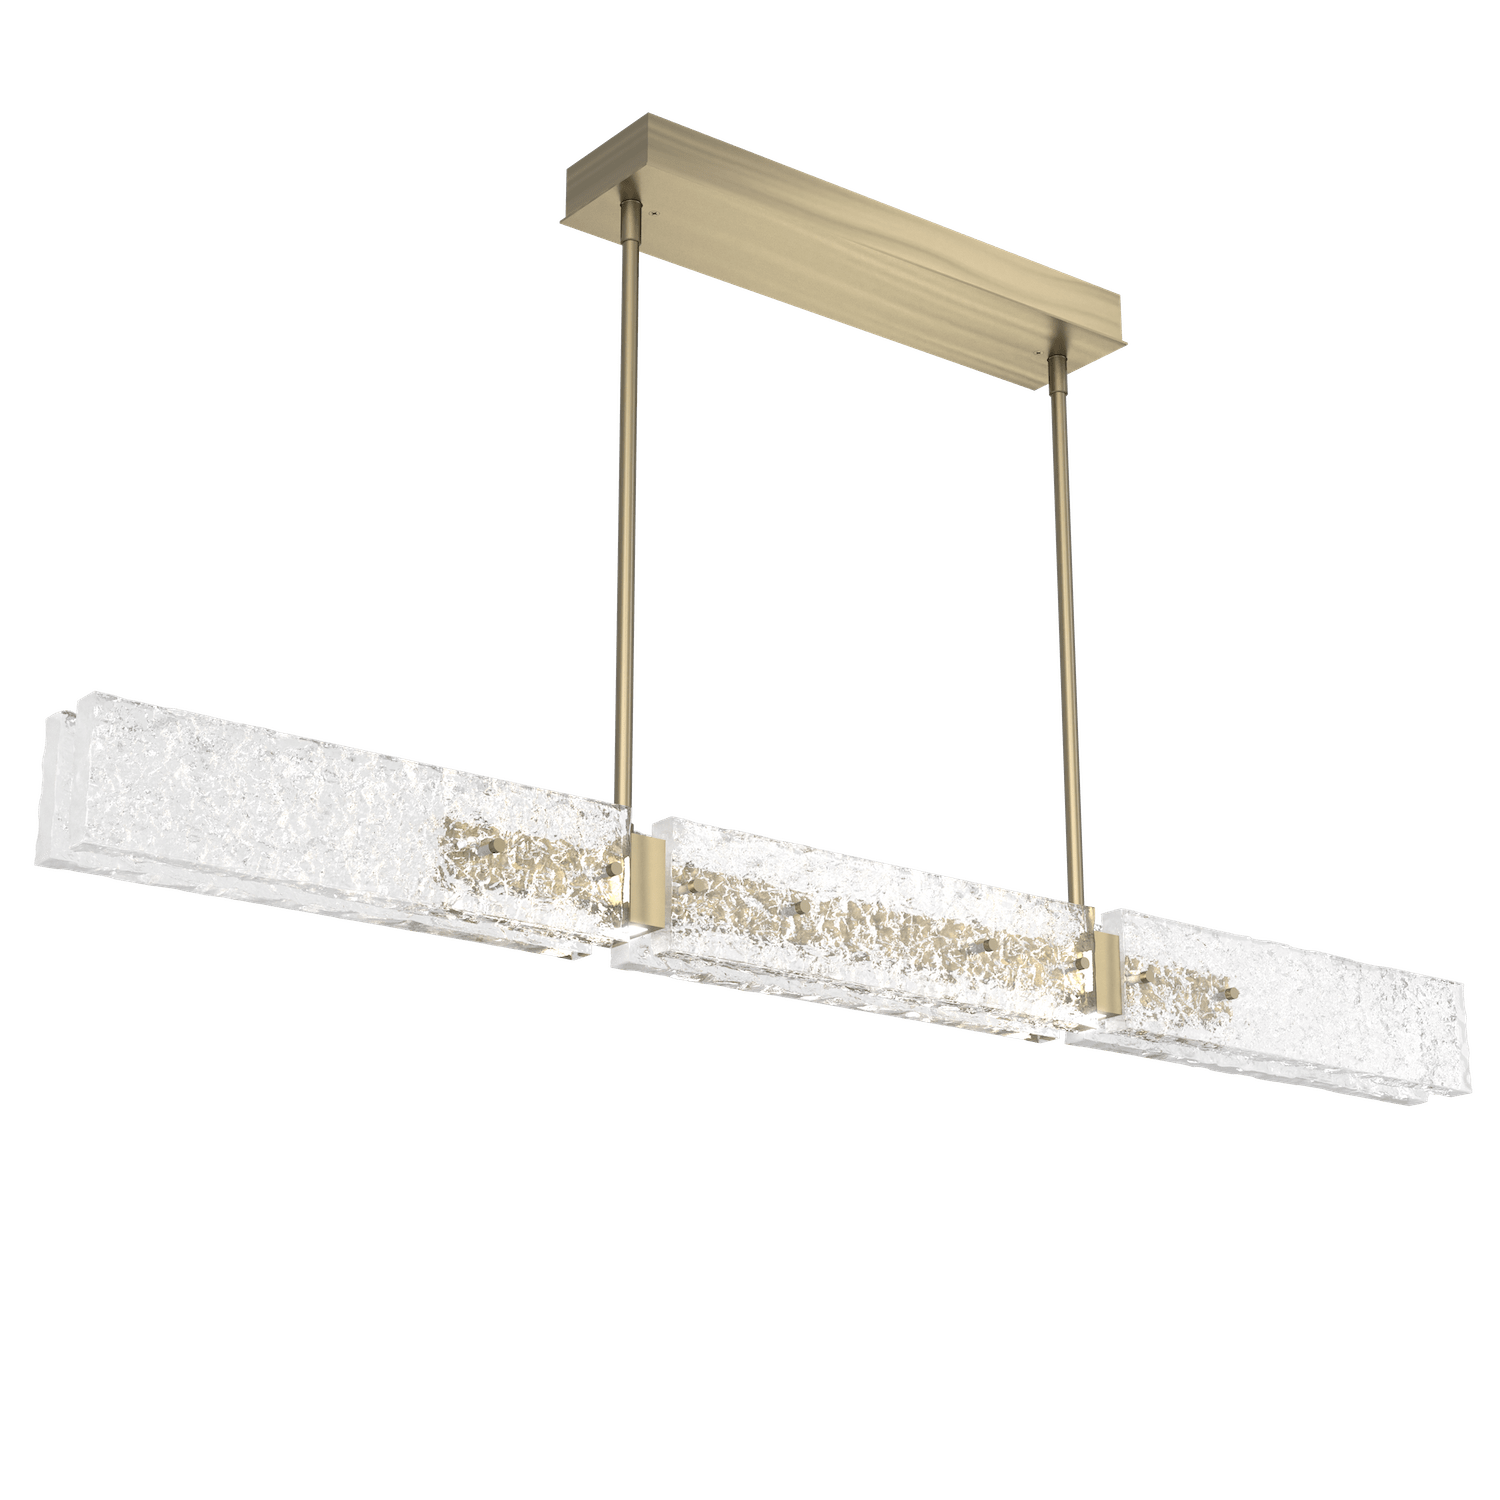 PLB0061-50-HB-GC-Hammerton-Studio-Glacier-50-inch-linear-chandelier-with-heritage-brass-finish-and-clear-blown-glass-with-geo-clear-cast-glass-diffusers-and-LED-lamping